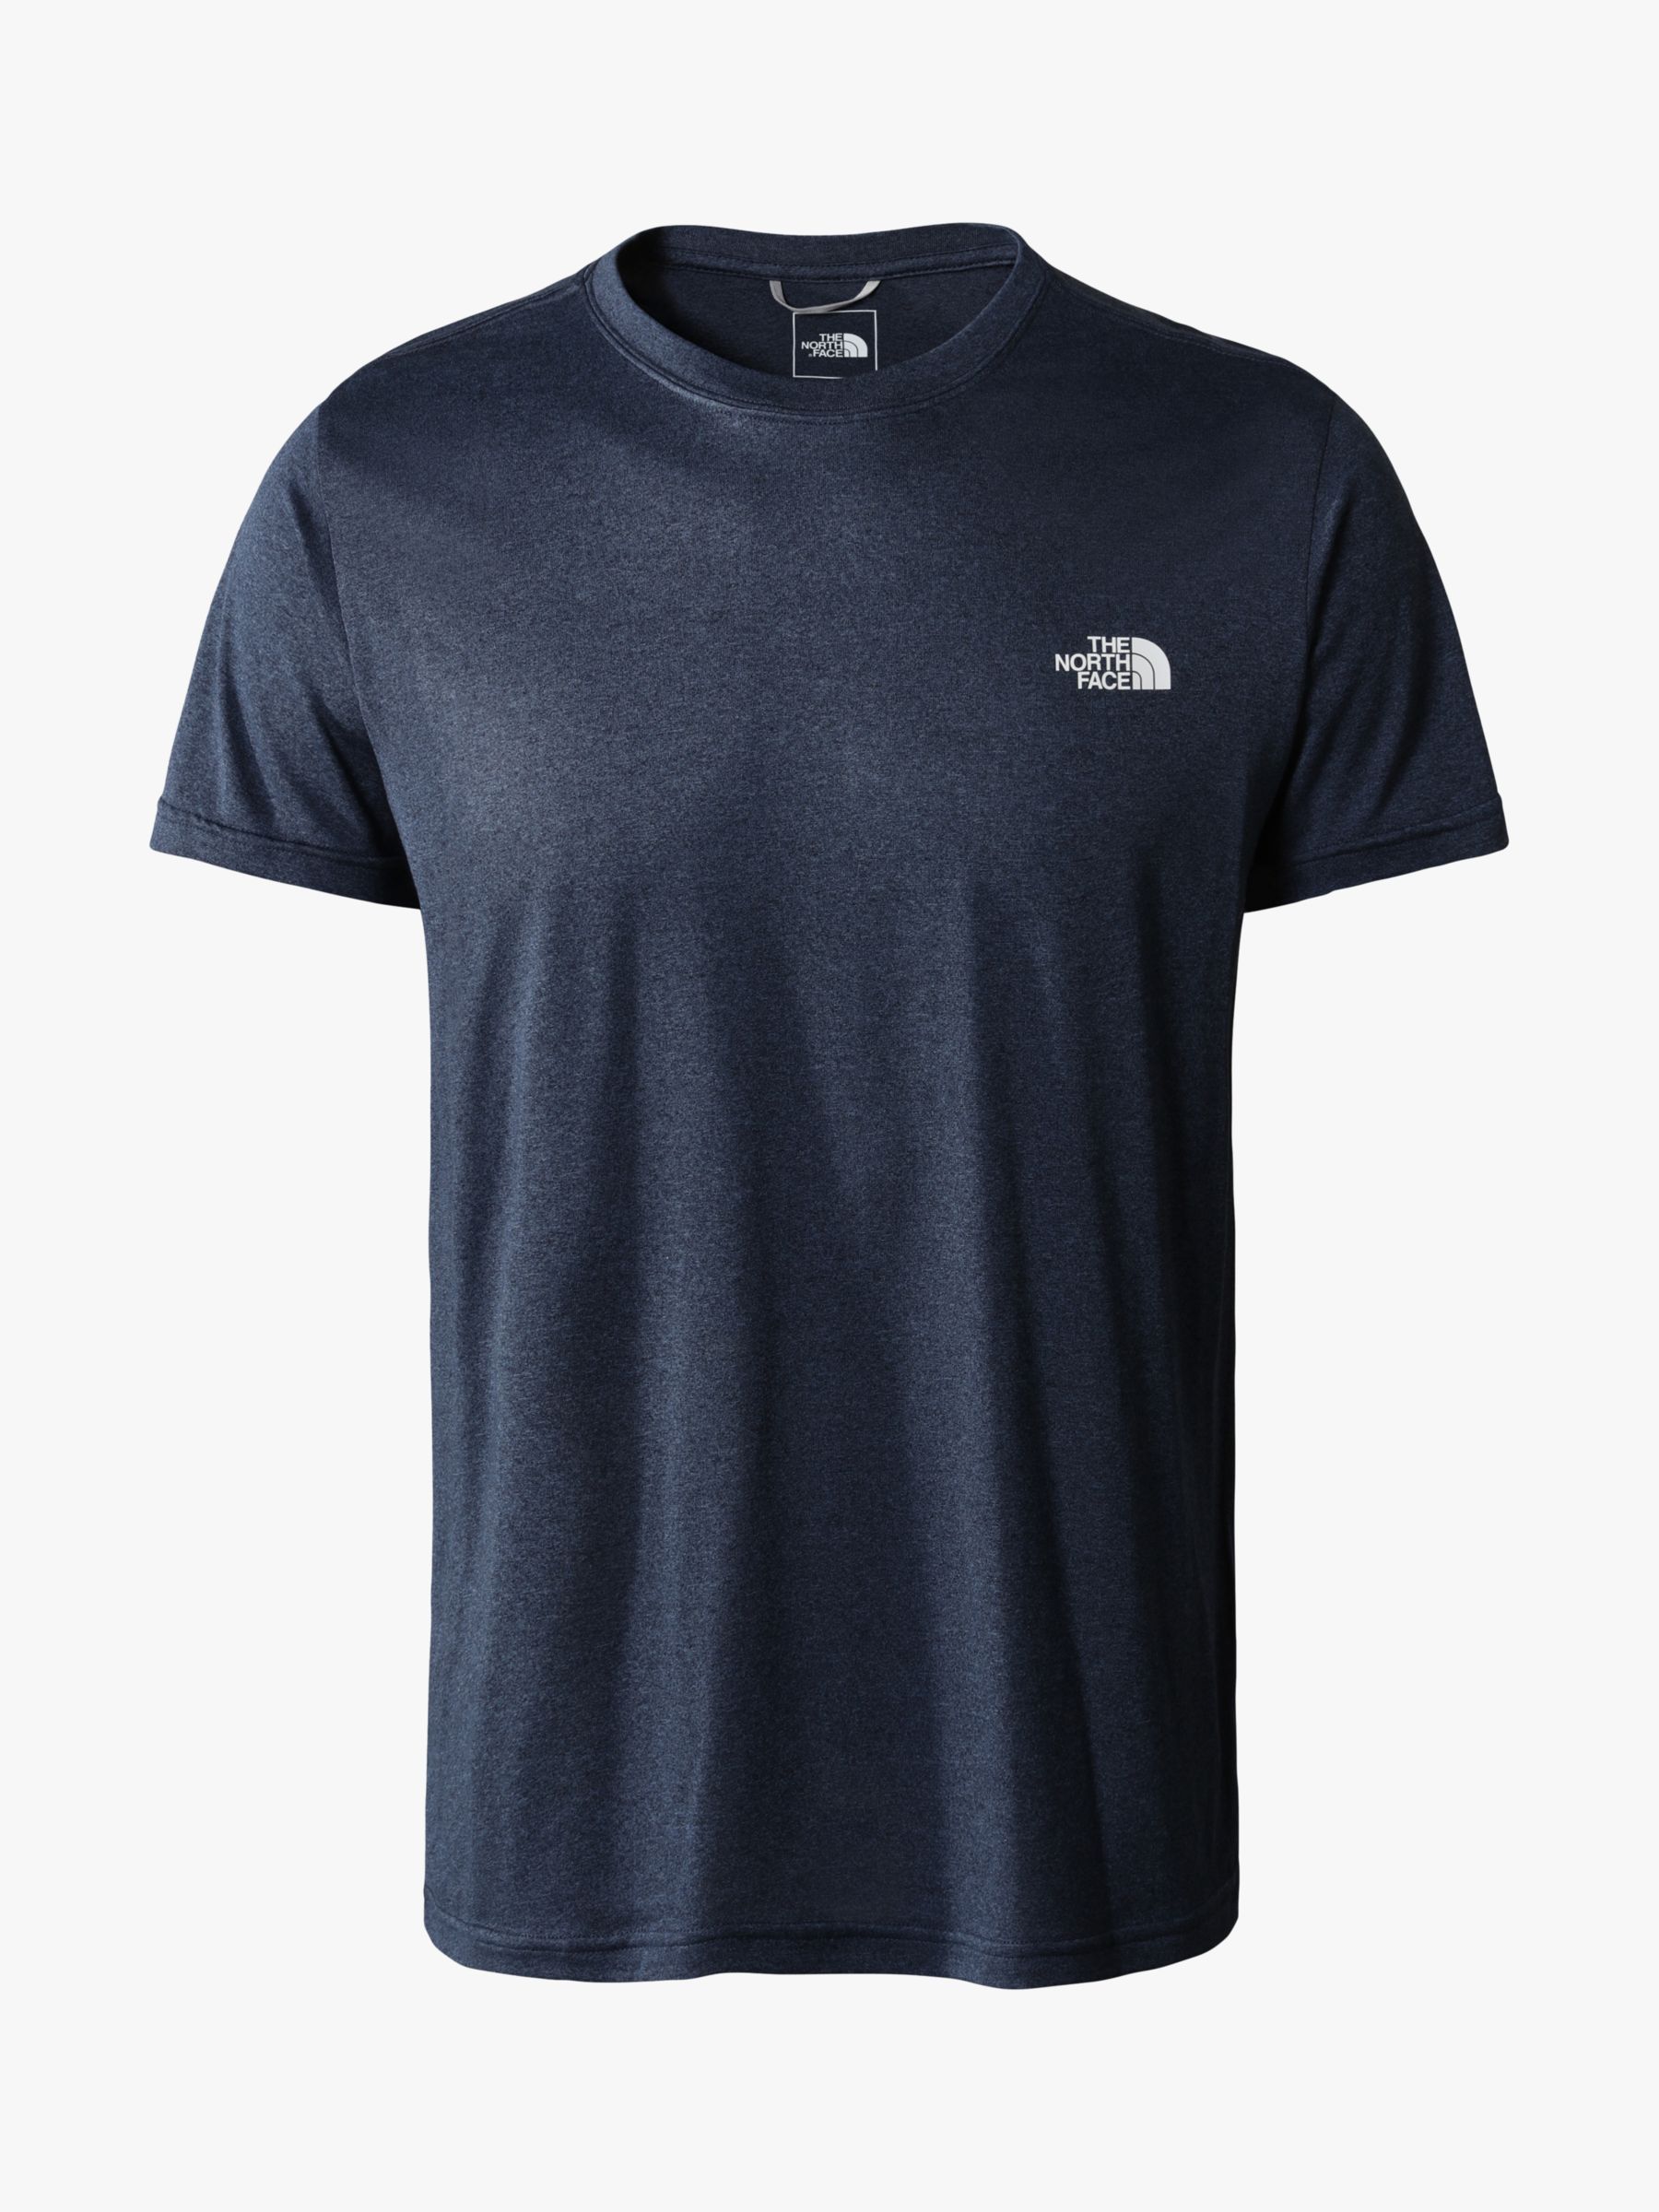 The North Face Reaxion Amp T-Shirt, Blue Heather, L